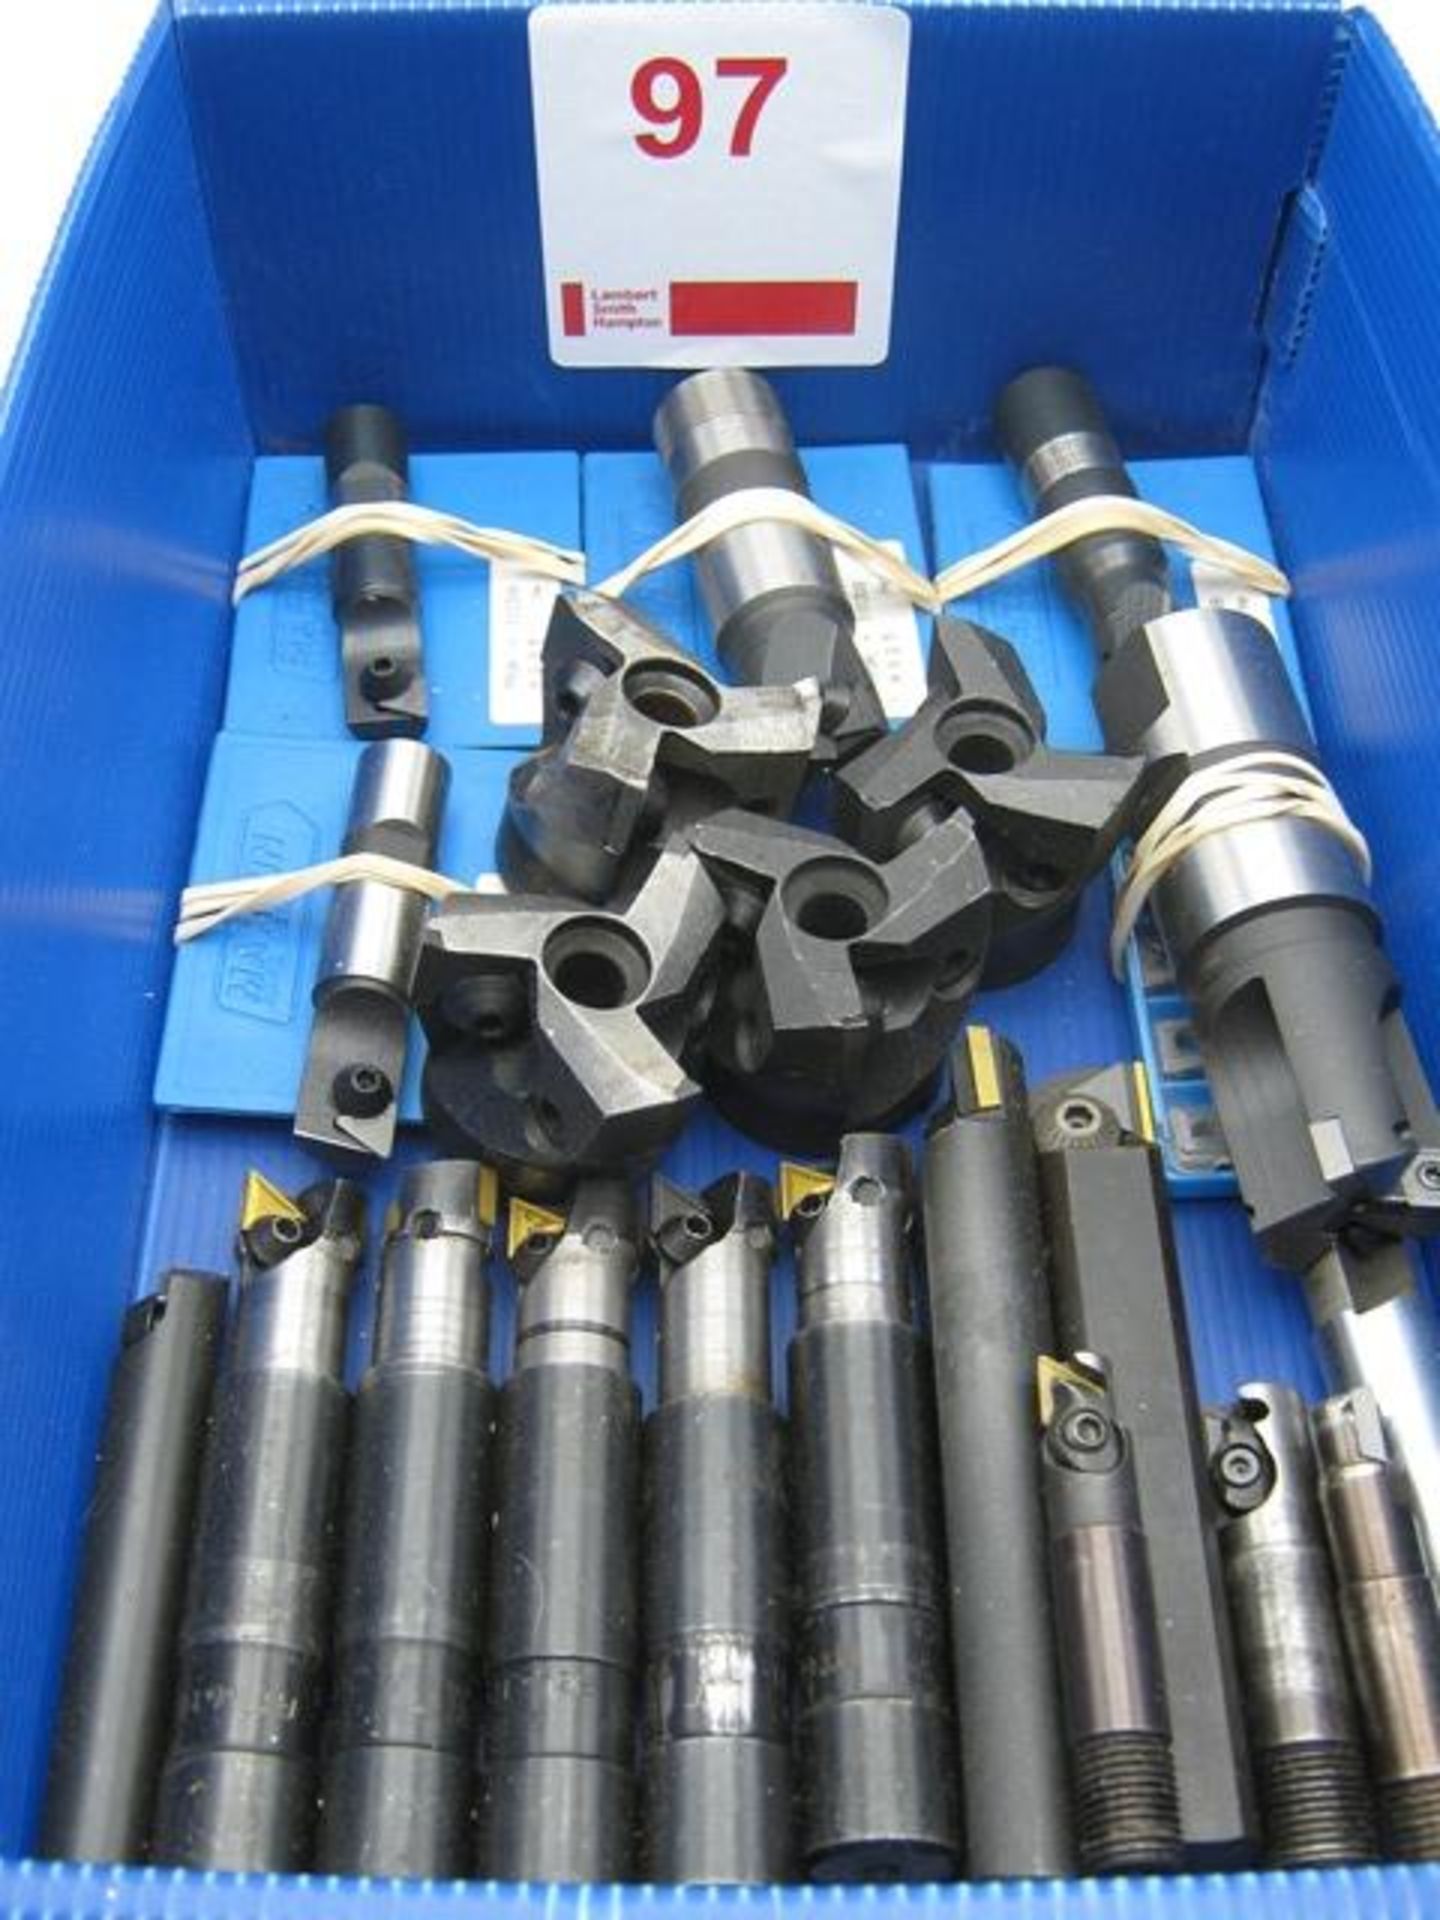 Tipped milling cutters and tips